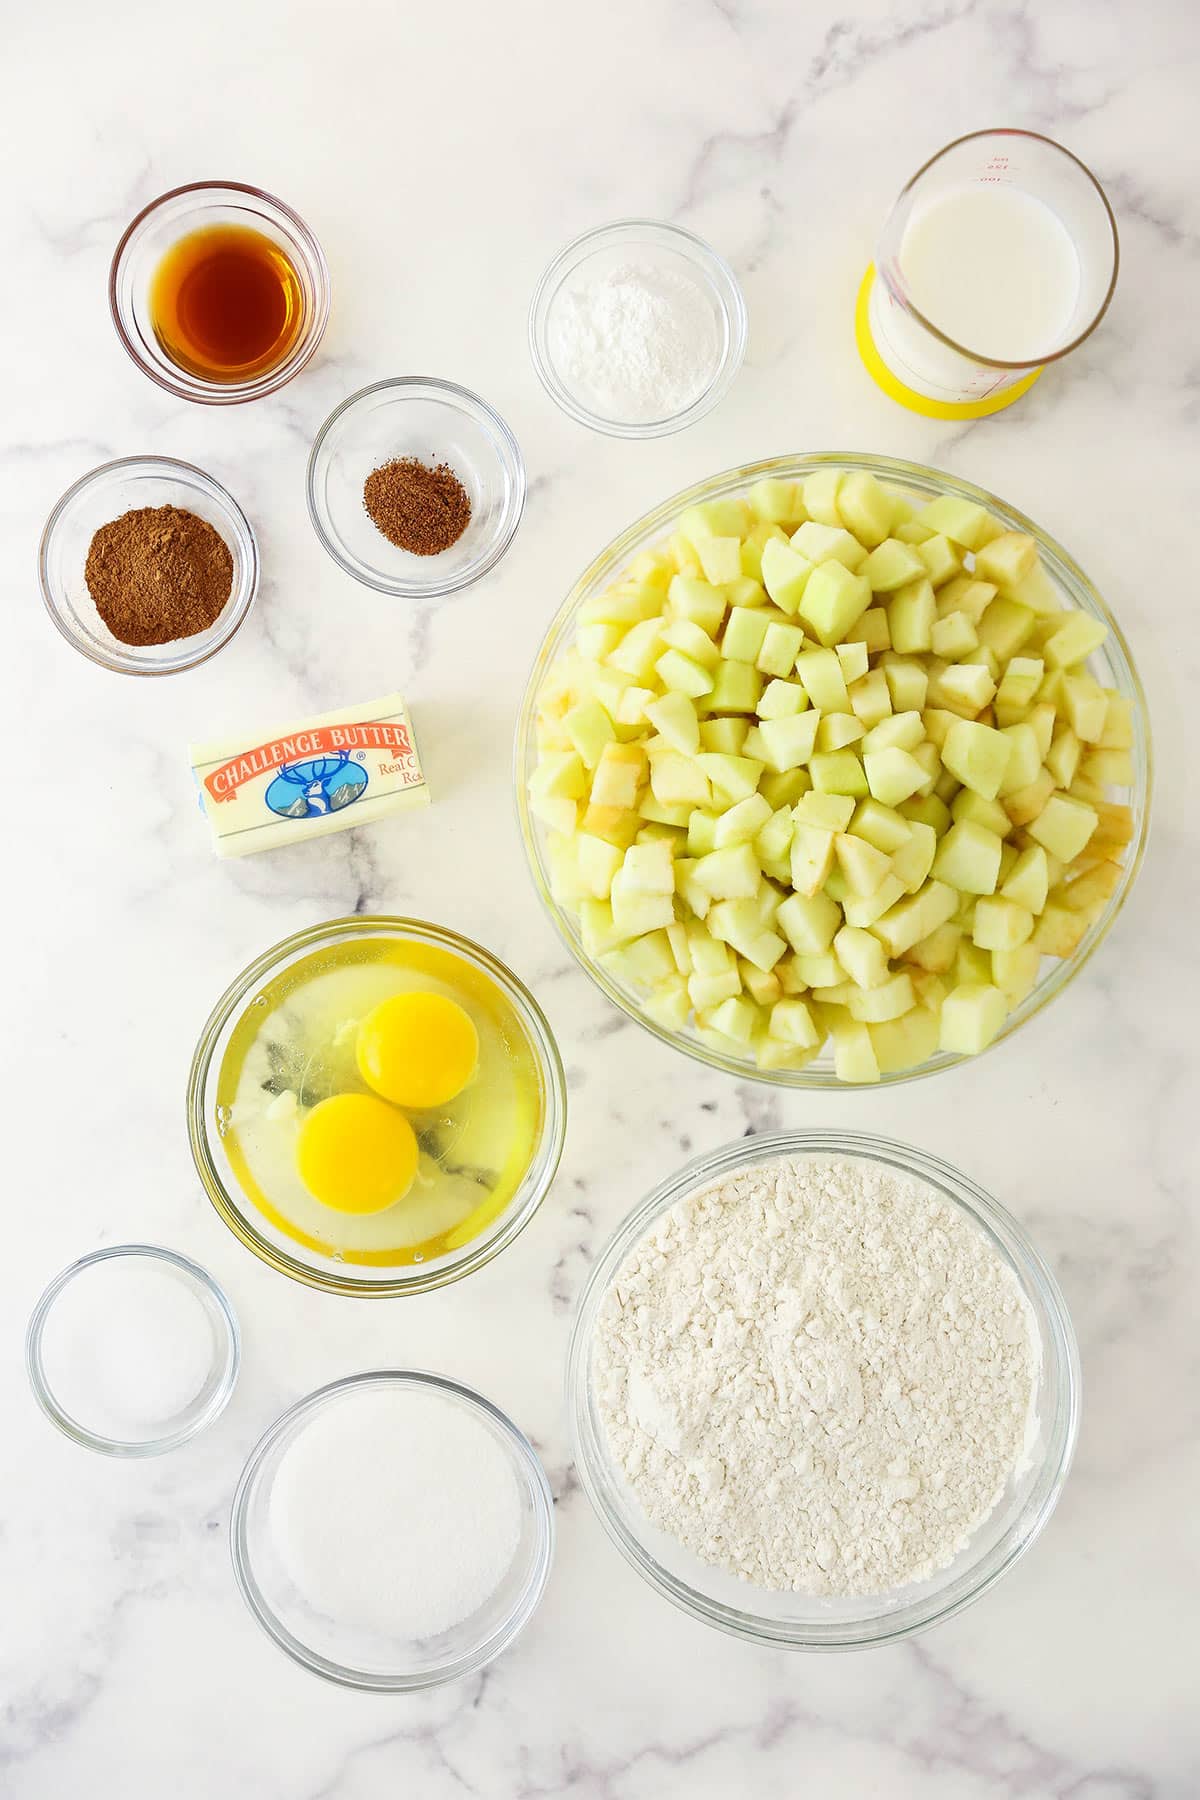 Chopped apples, flour, eggs, butter and the rest of the ingredients arranged neatly on top of a marble kitchen counter